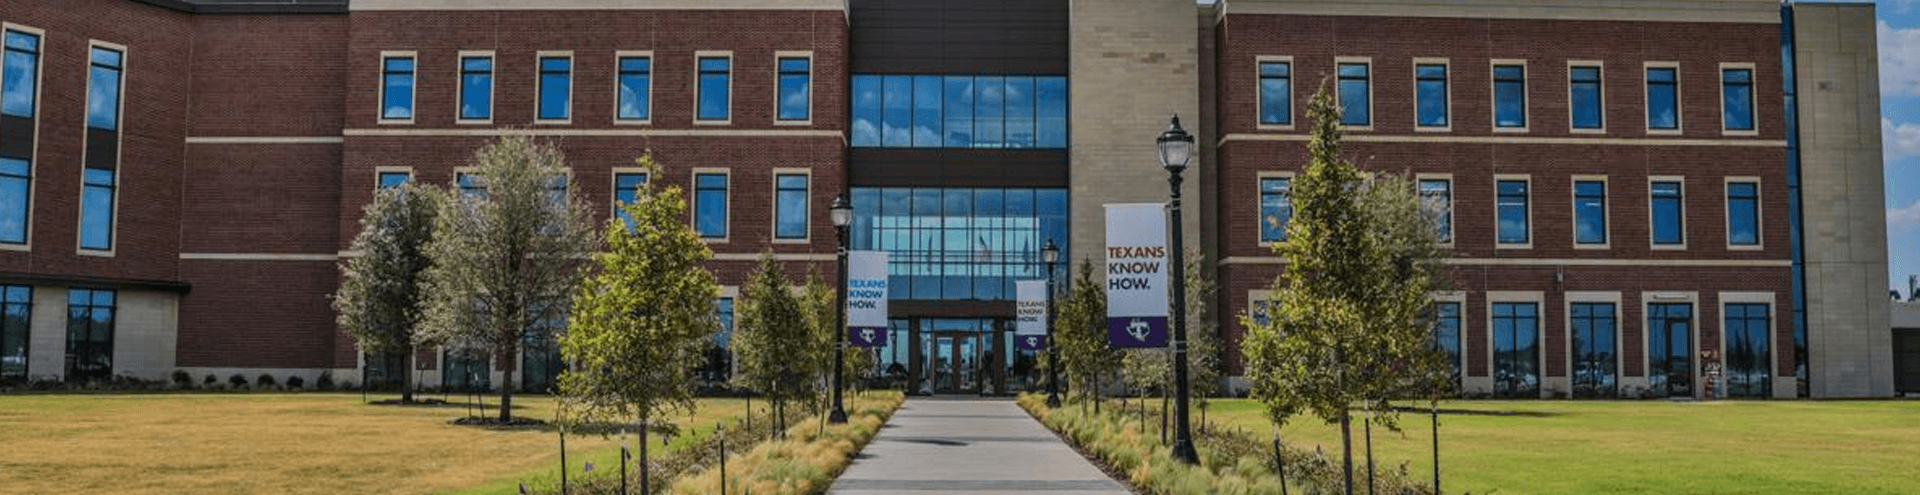 75 Off Tarleton State University Book For 2021 Bscouponscom